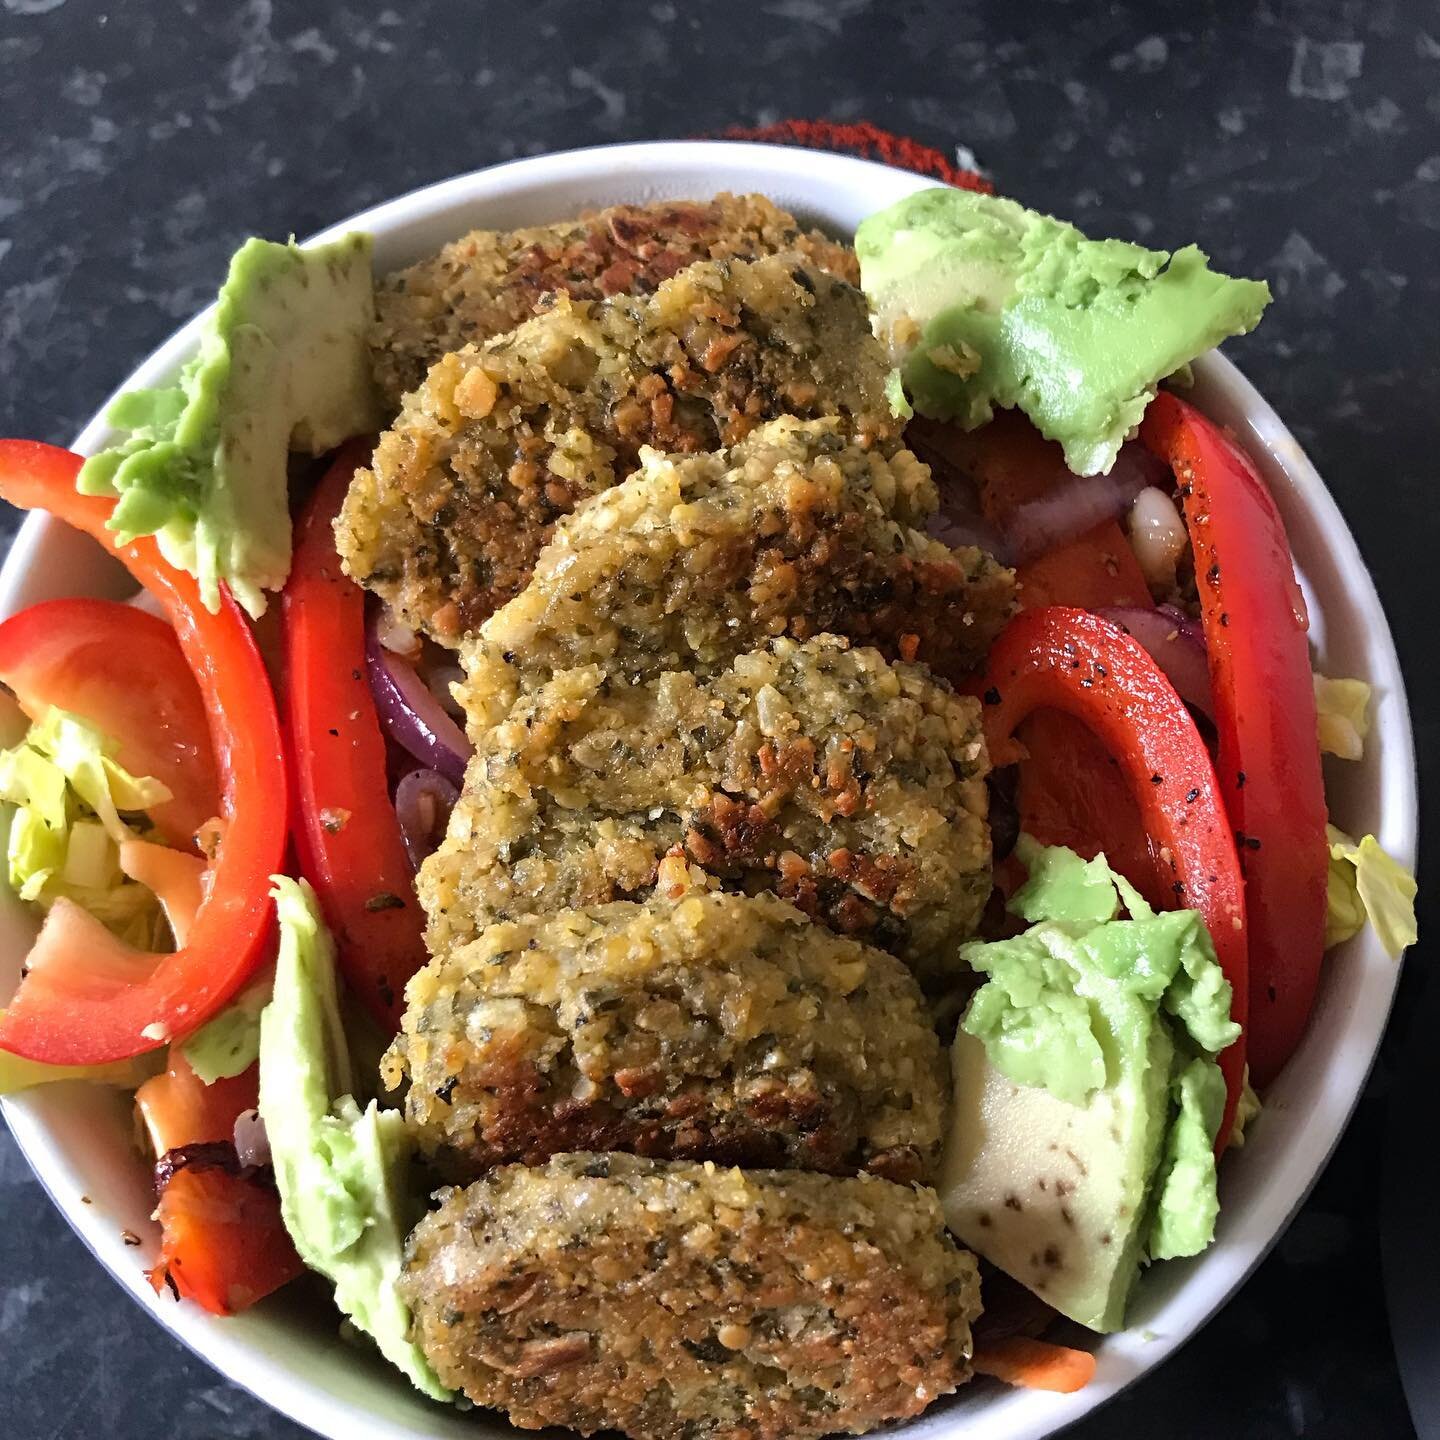 Homemade falafel salad with avocado, saut&eacute;ed onions &amp; peppers. Second picture topped with homemade paprika hummus and black sesame seeds 🤤😍

#nutrition #nourishyourbody #nourish #nutritionist #nutritionaltherapy #eattherainbow #lunchtime